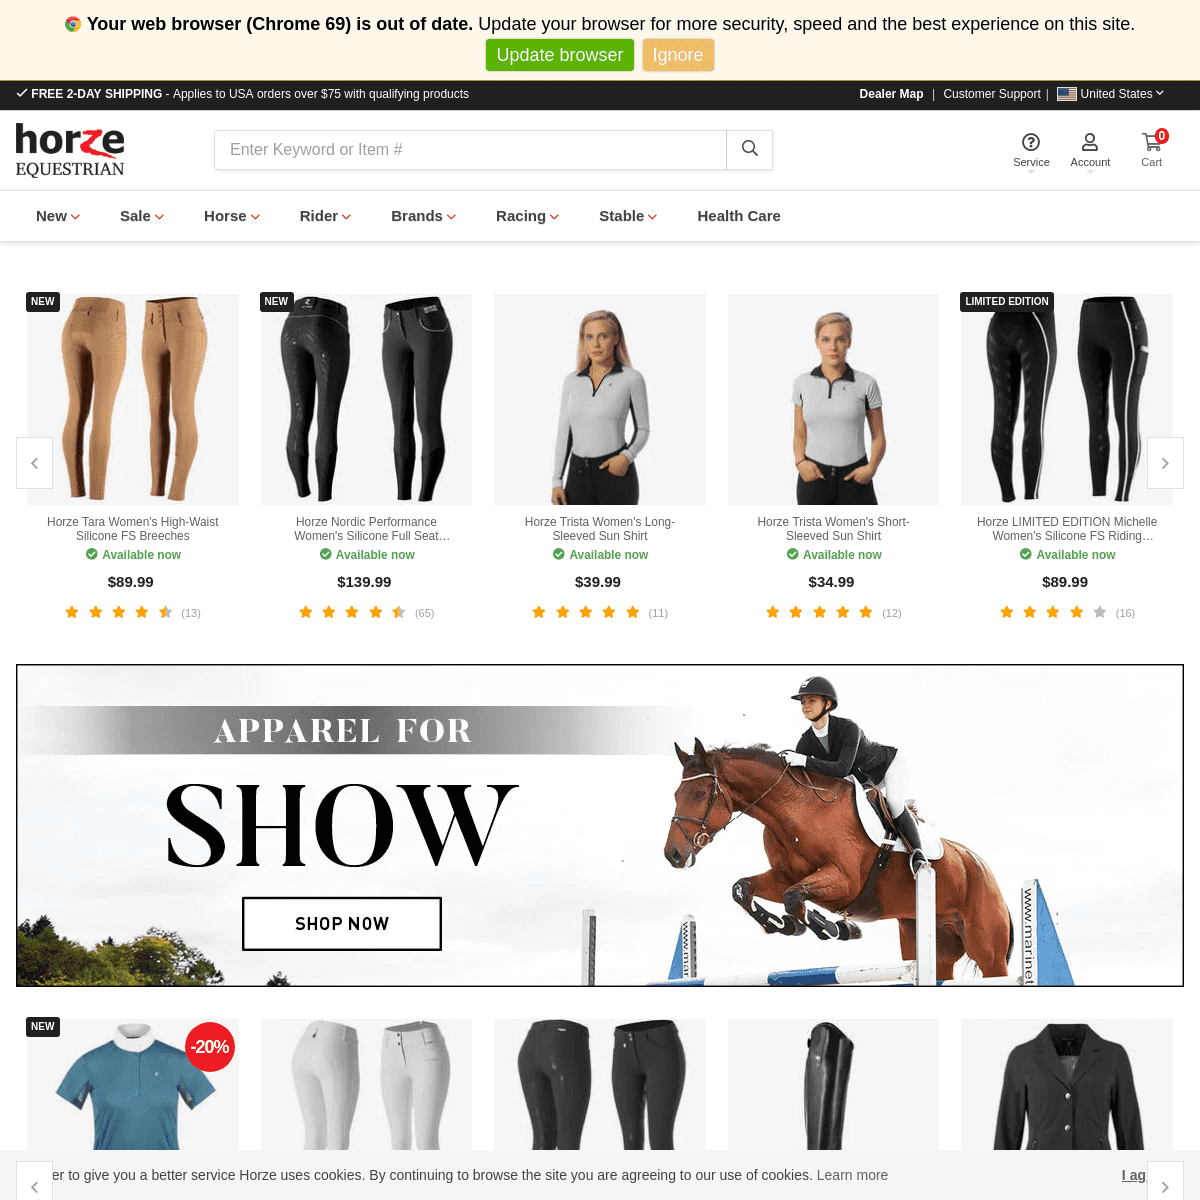  Online shop for Horse Tack, Riding Apparel, Horse Supplies and Equestrian Clothing.